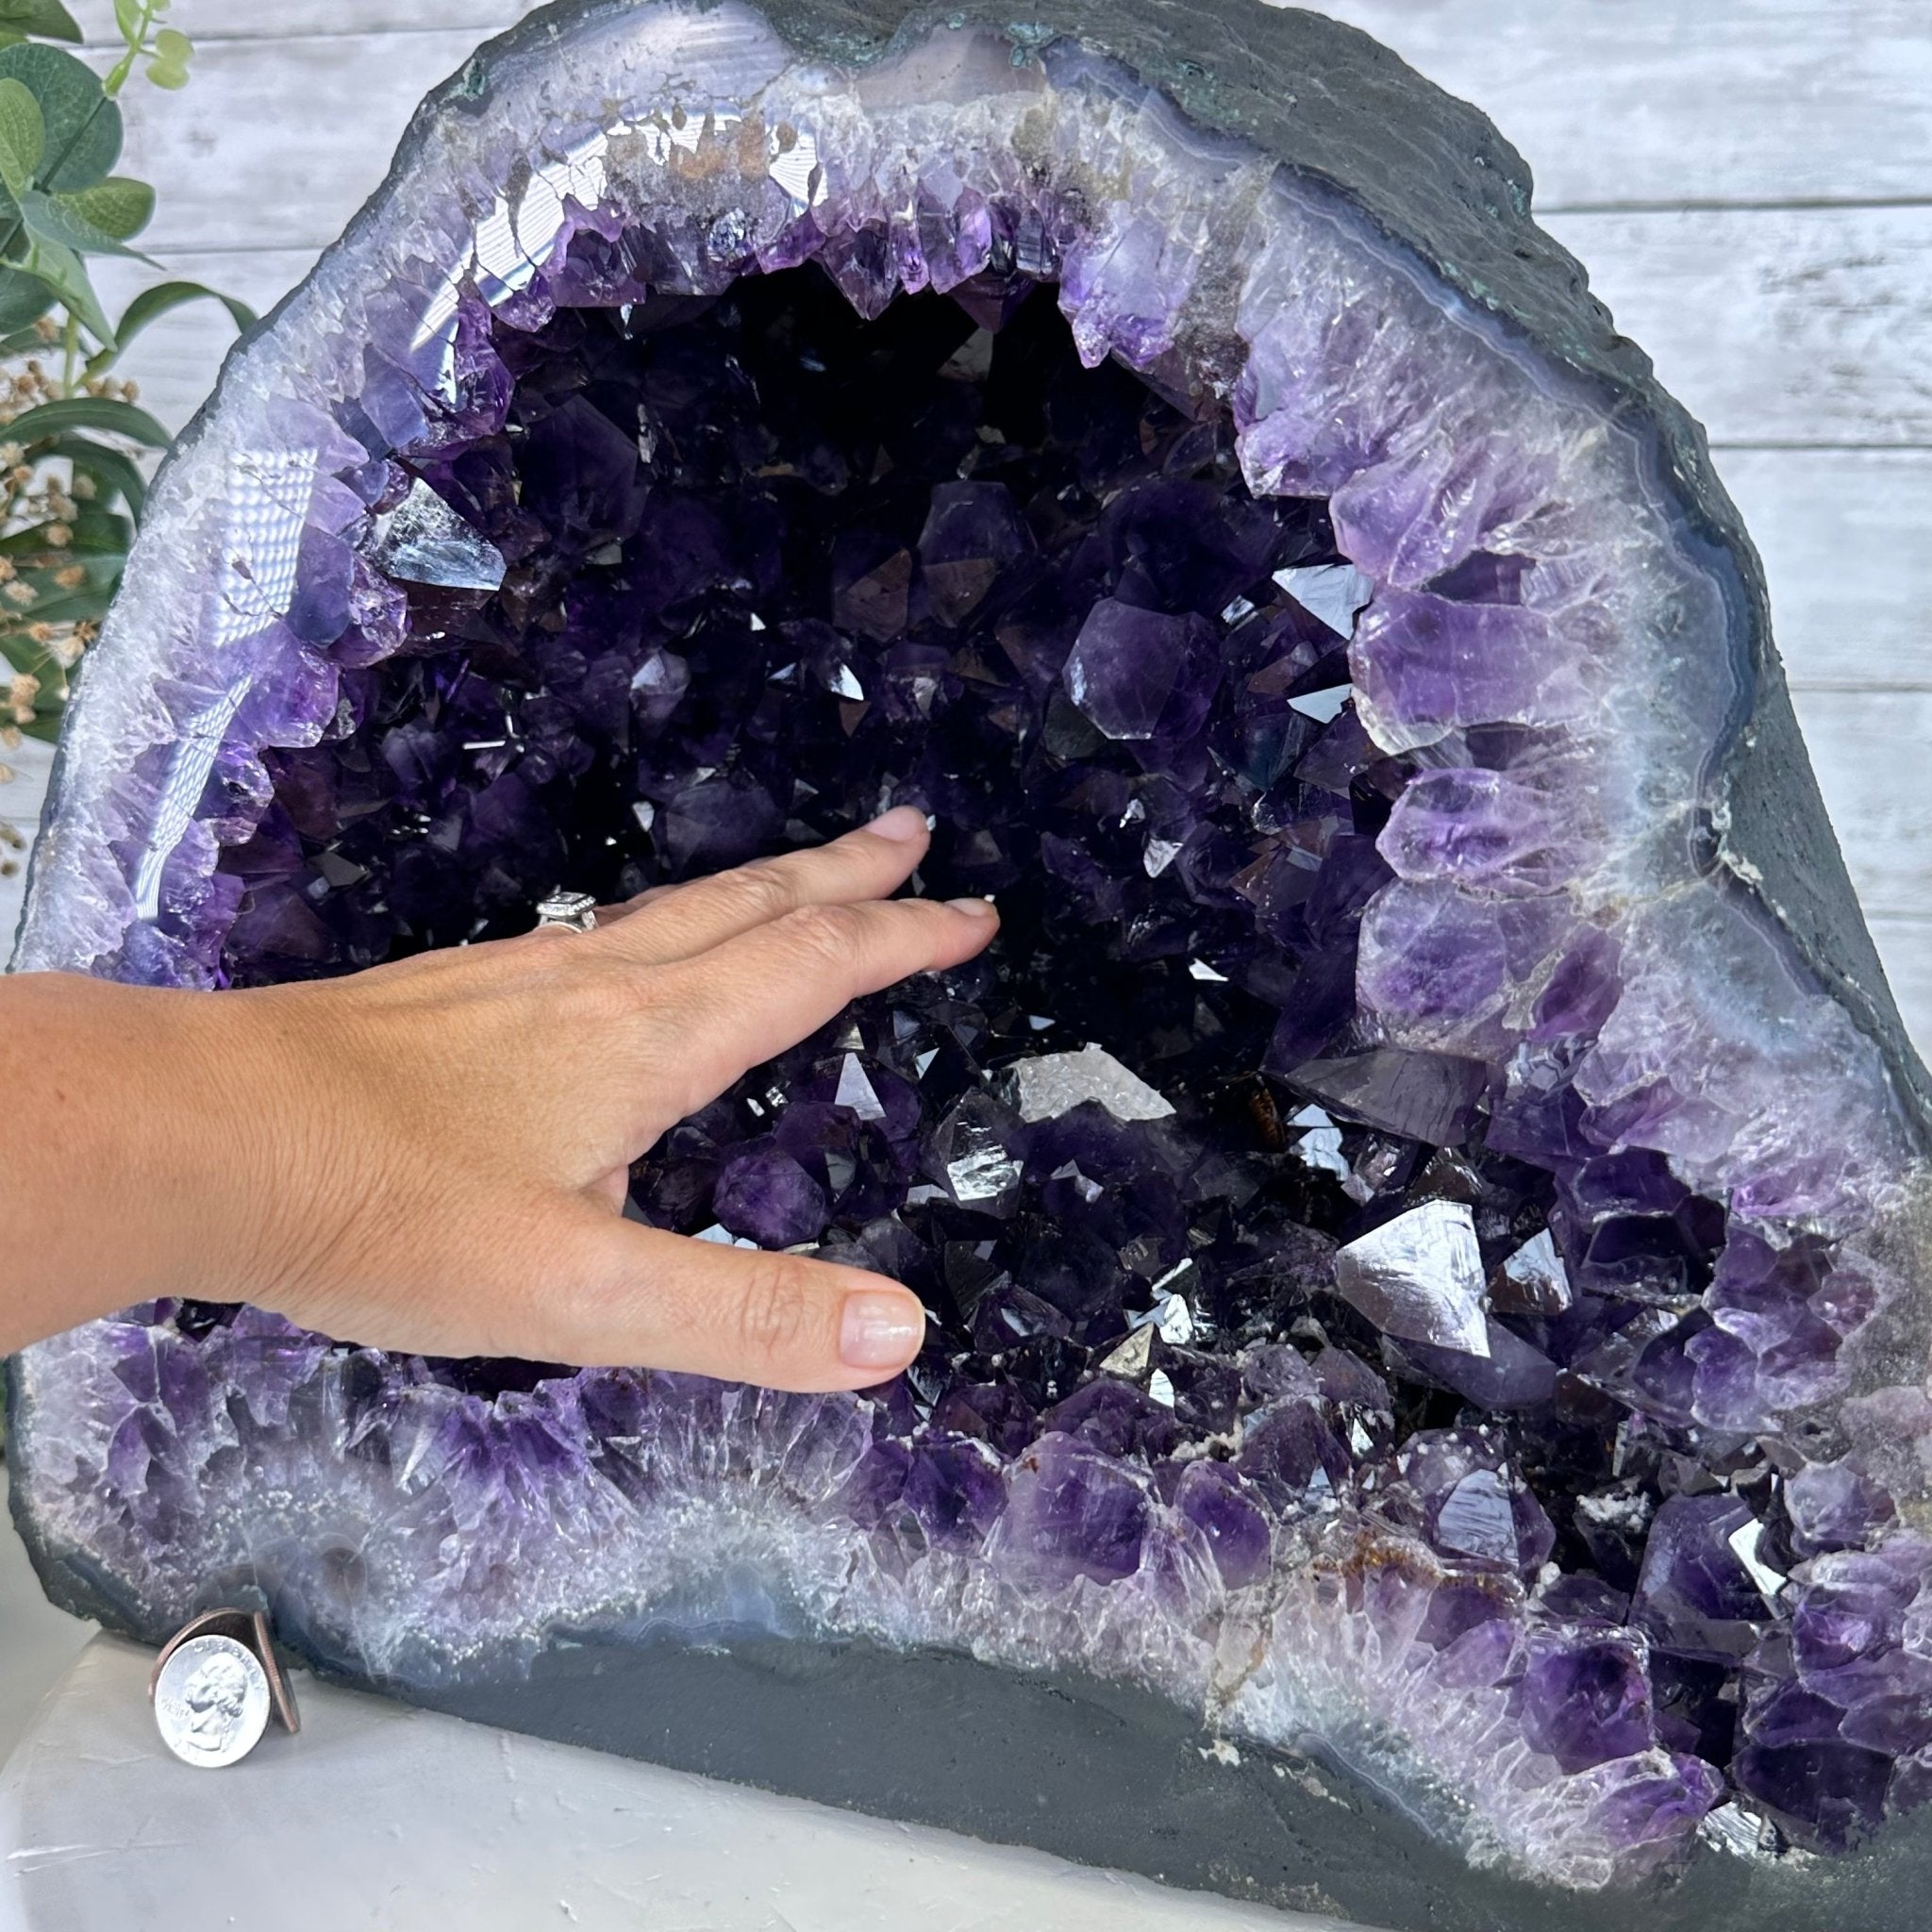 Extra Plus Quality Brazilian Amethyst Cathedral, 74.7 lbs & 13.5" Tall, Model #5601-0886 by Brazil Gems - Brazil GemsBrazil GemsExtra Plus Quality Brazilian Amethyst Cathedral, 74.7 lbs & 13.5" Tall, Model #5601-0886 by Brazil GemsCathedrals5601-0886